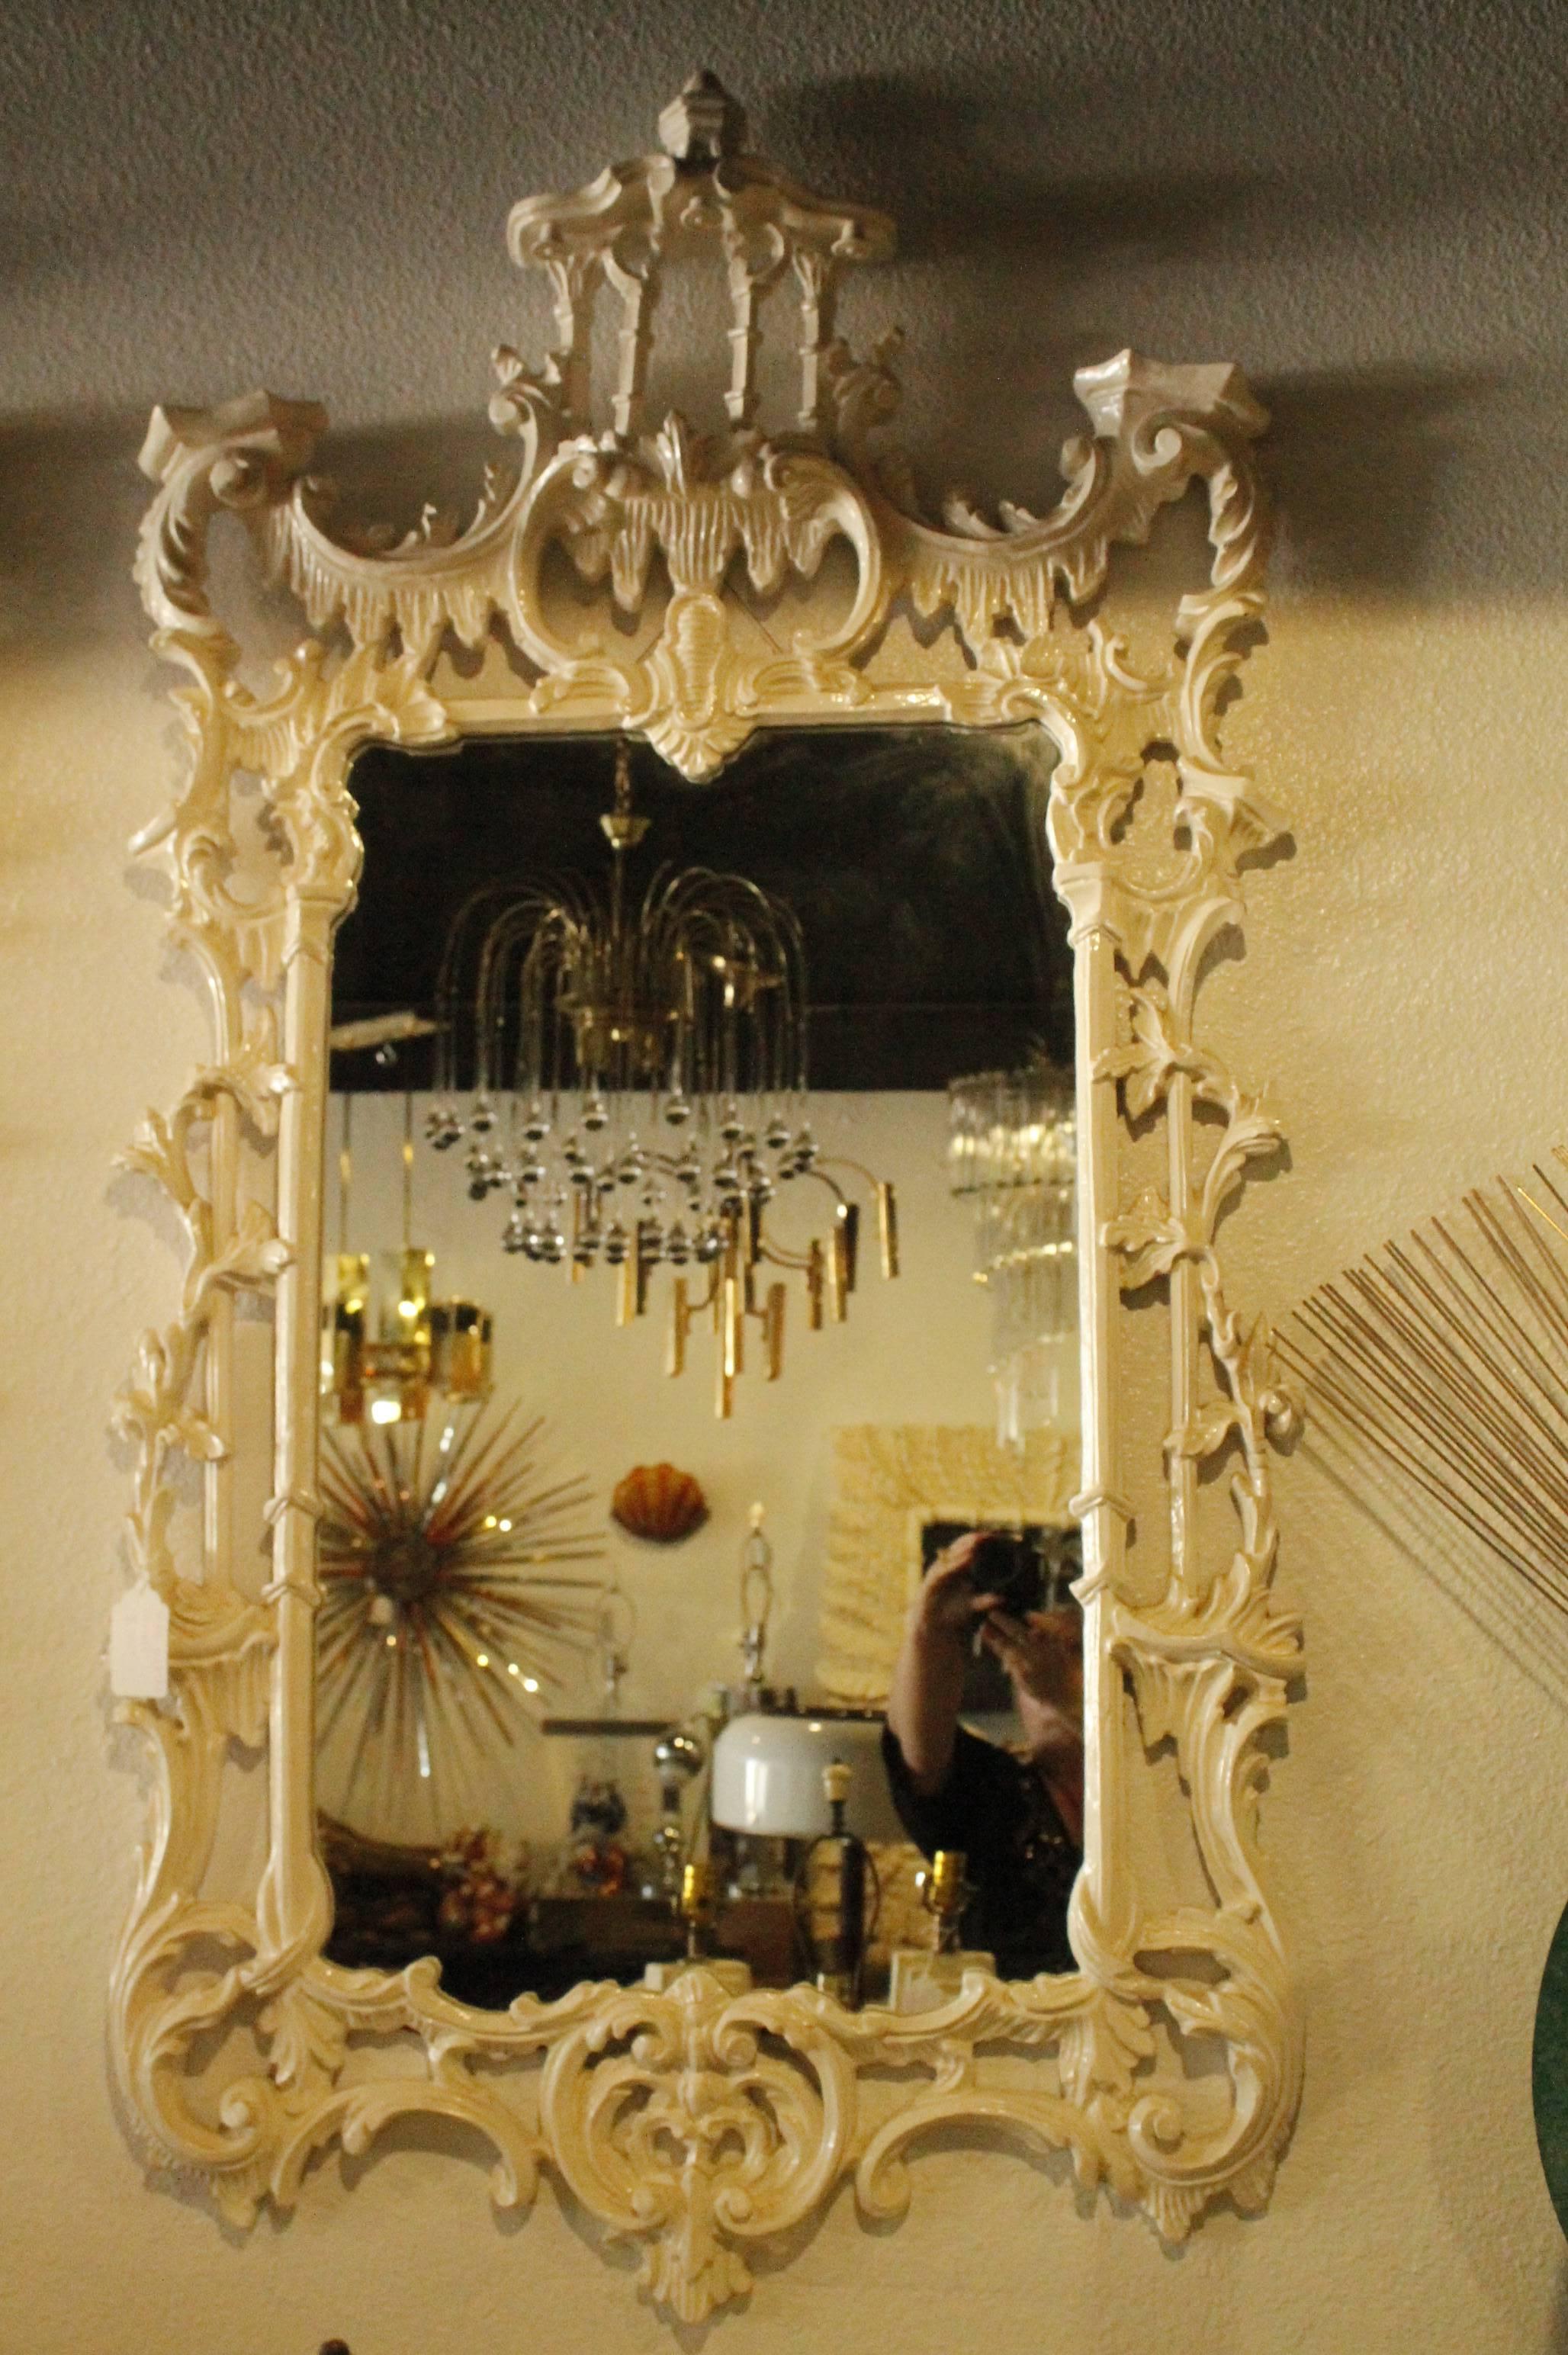 Lovely pair of vintage Hollywood Palm Beach Regency Chinese Chippendale pagoda wall mirrors with bells. These can be purchased as is one yellow and one white or buyer can choose a new color for the pair to be professionally lacquered. Please allow